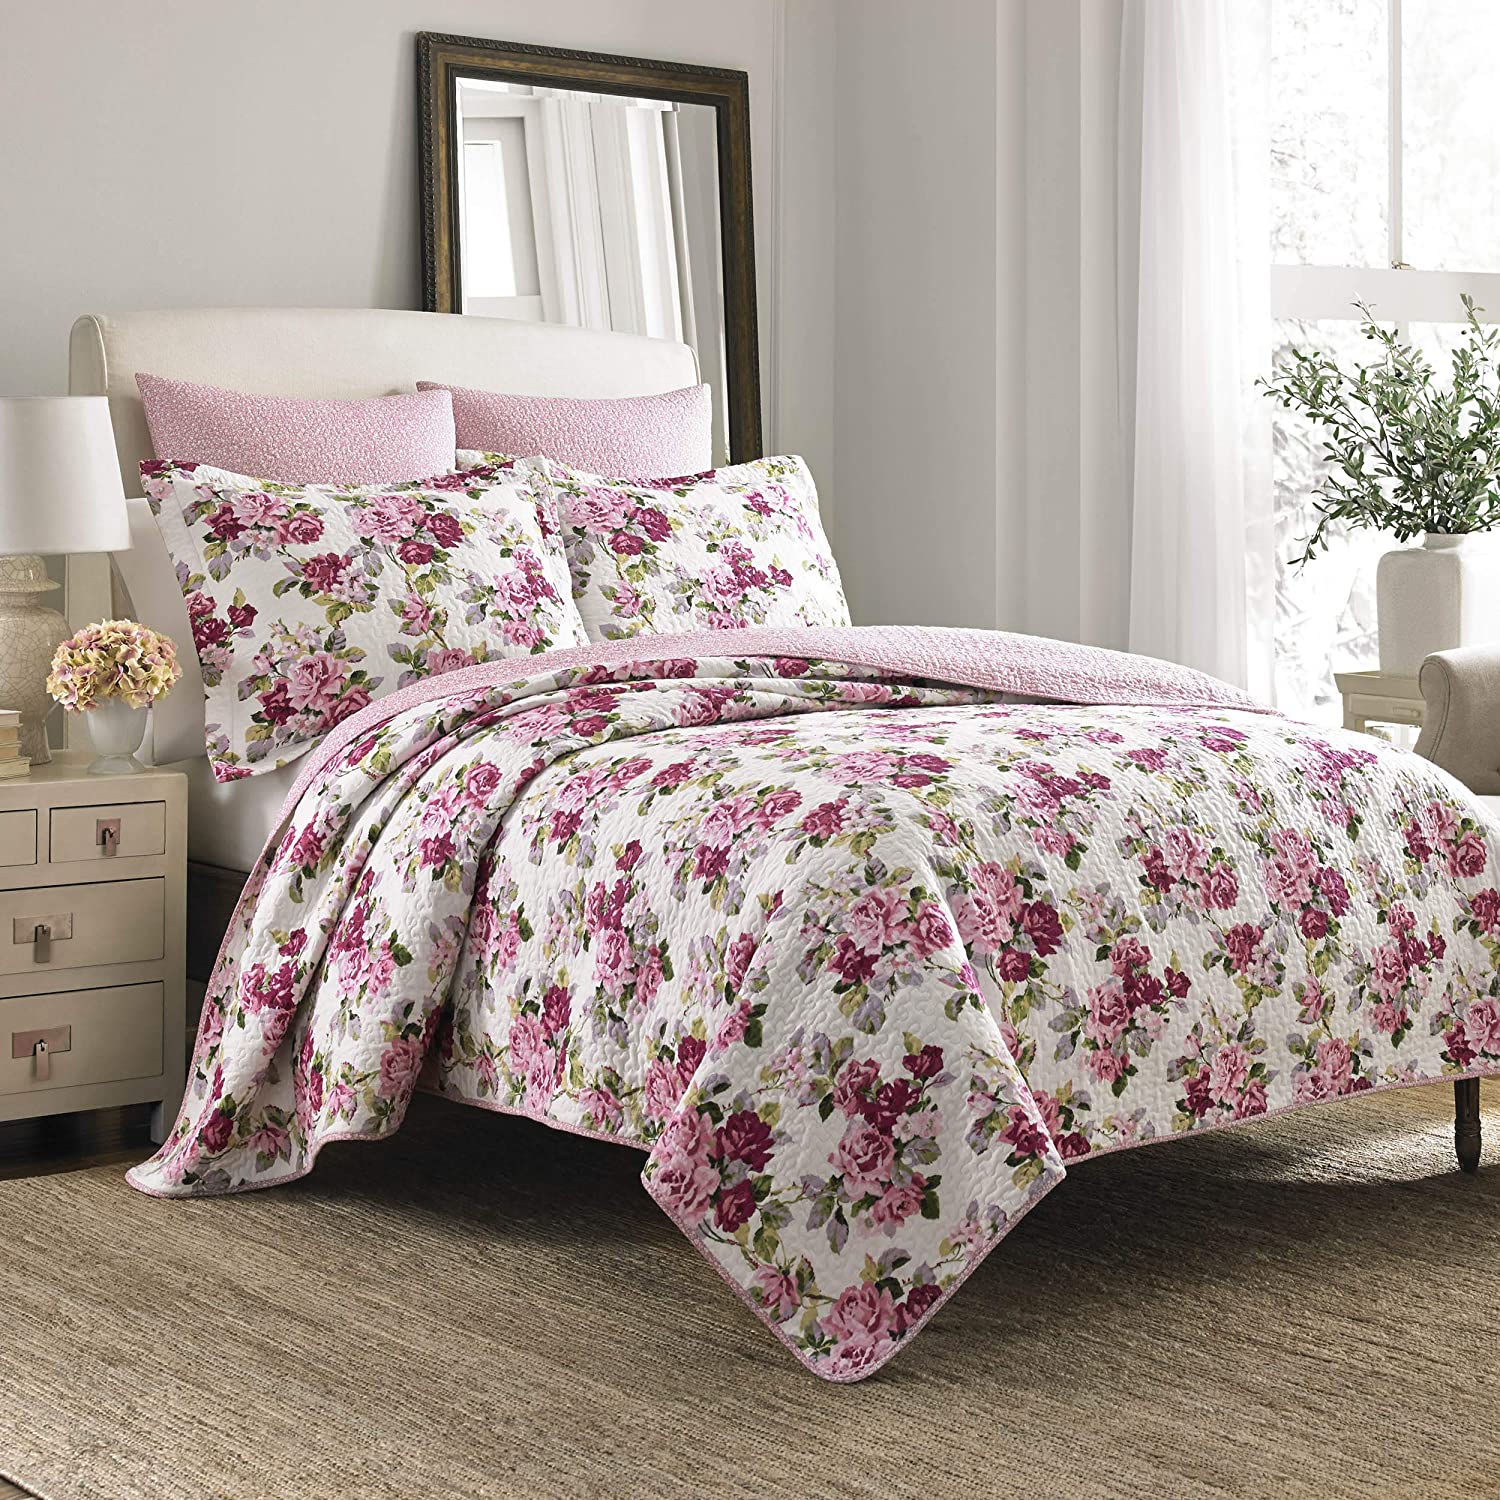 Laura Ashley HomeRowland CollectionLuxury Premium Ultra Soft Quilt Cove... 